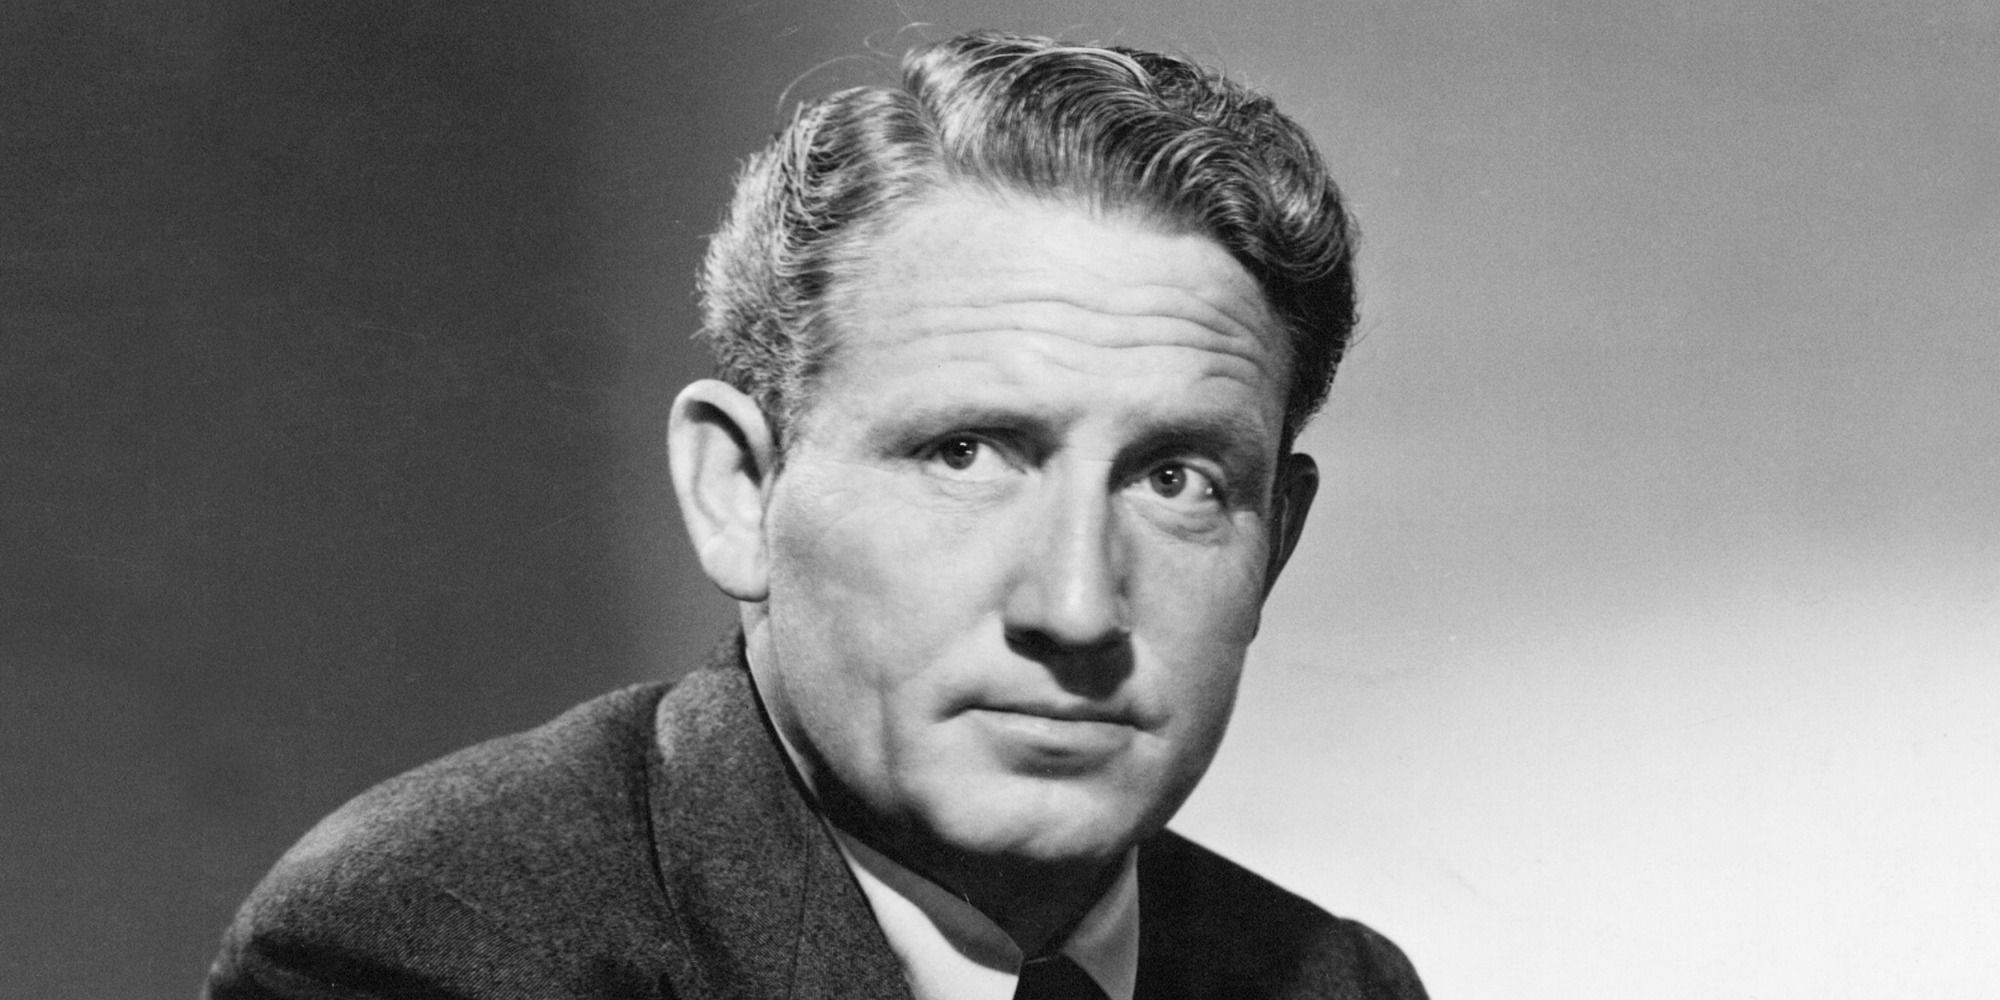 Spencer Tracy in an old portrait looking to the distance.